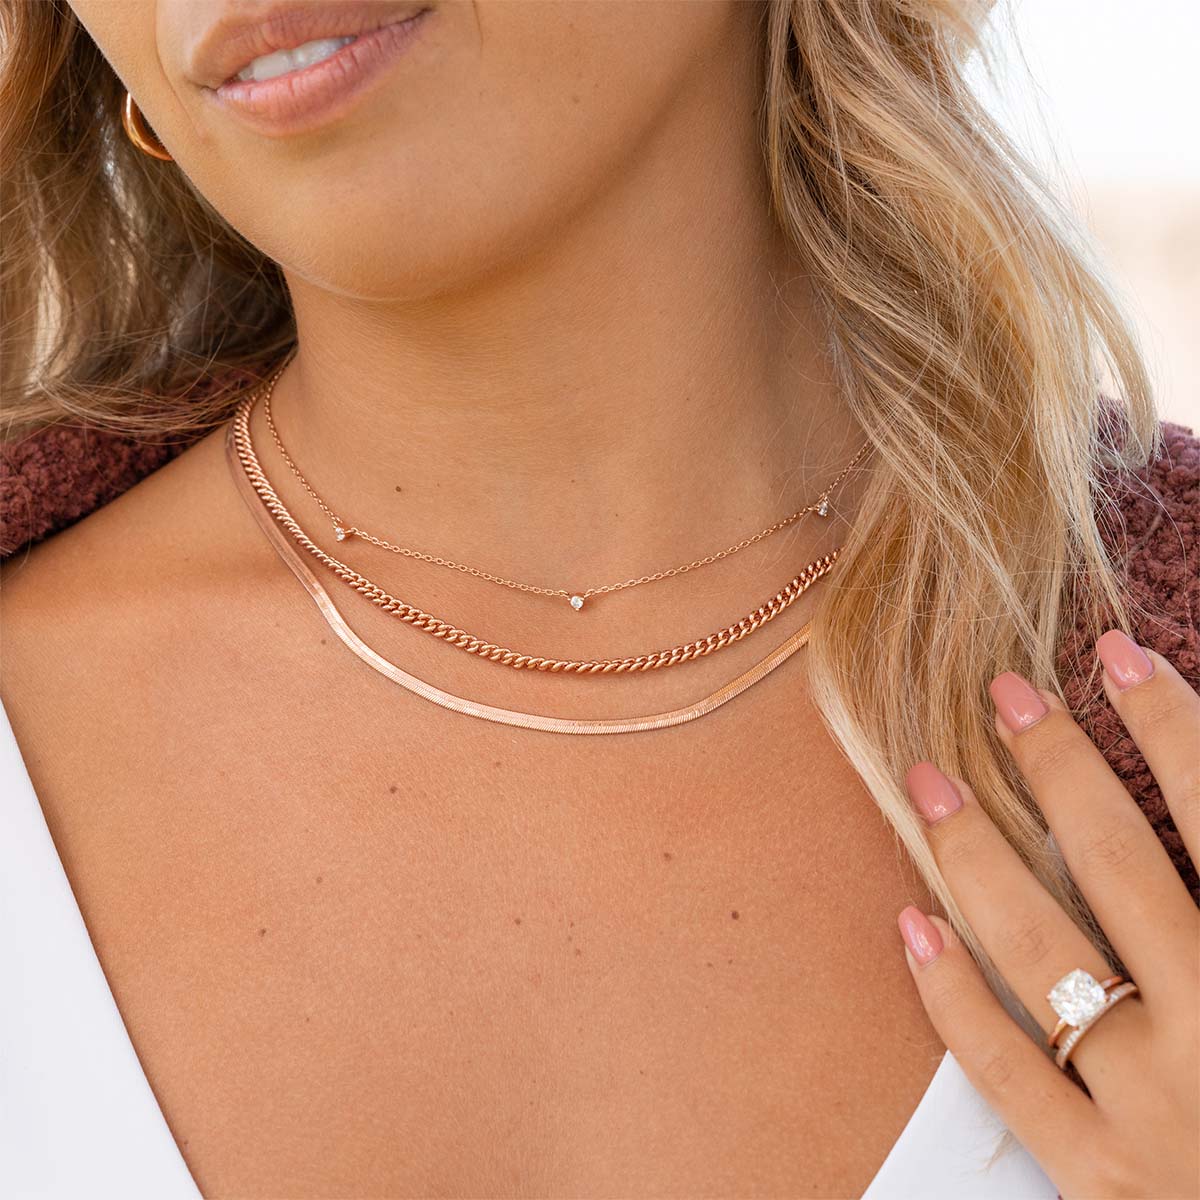 Cute rose gold layered necklaces on model